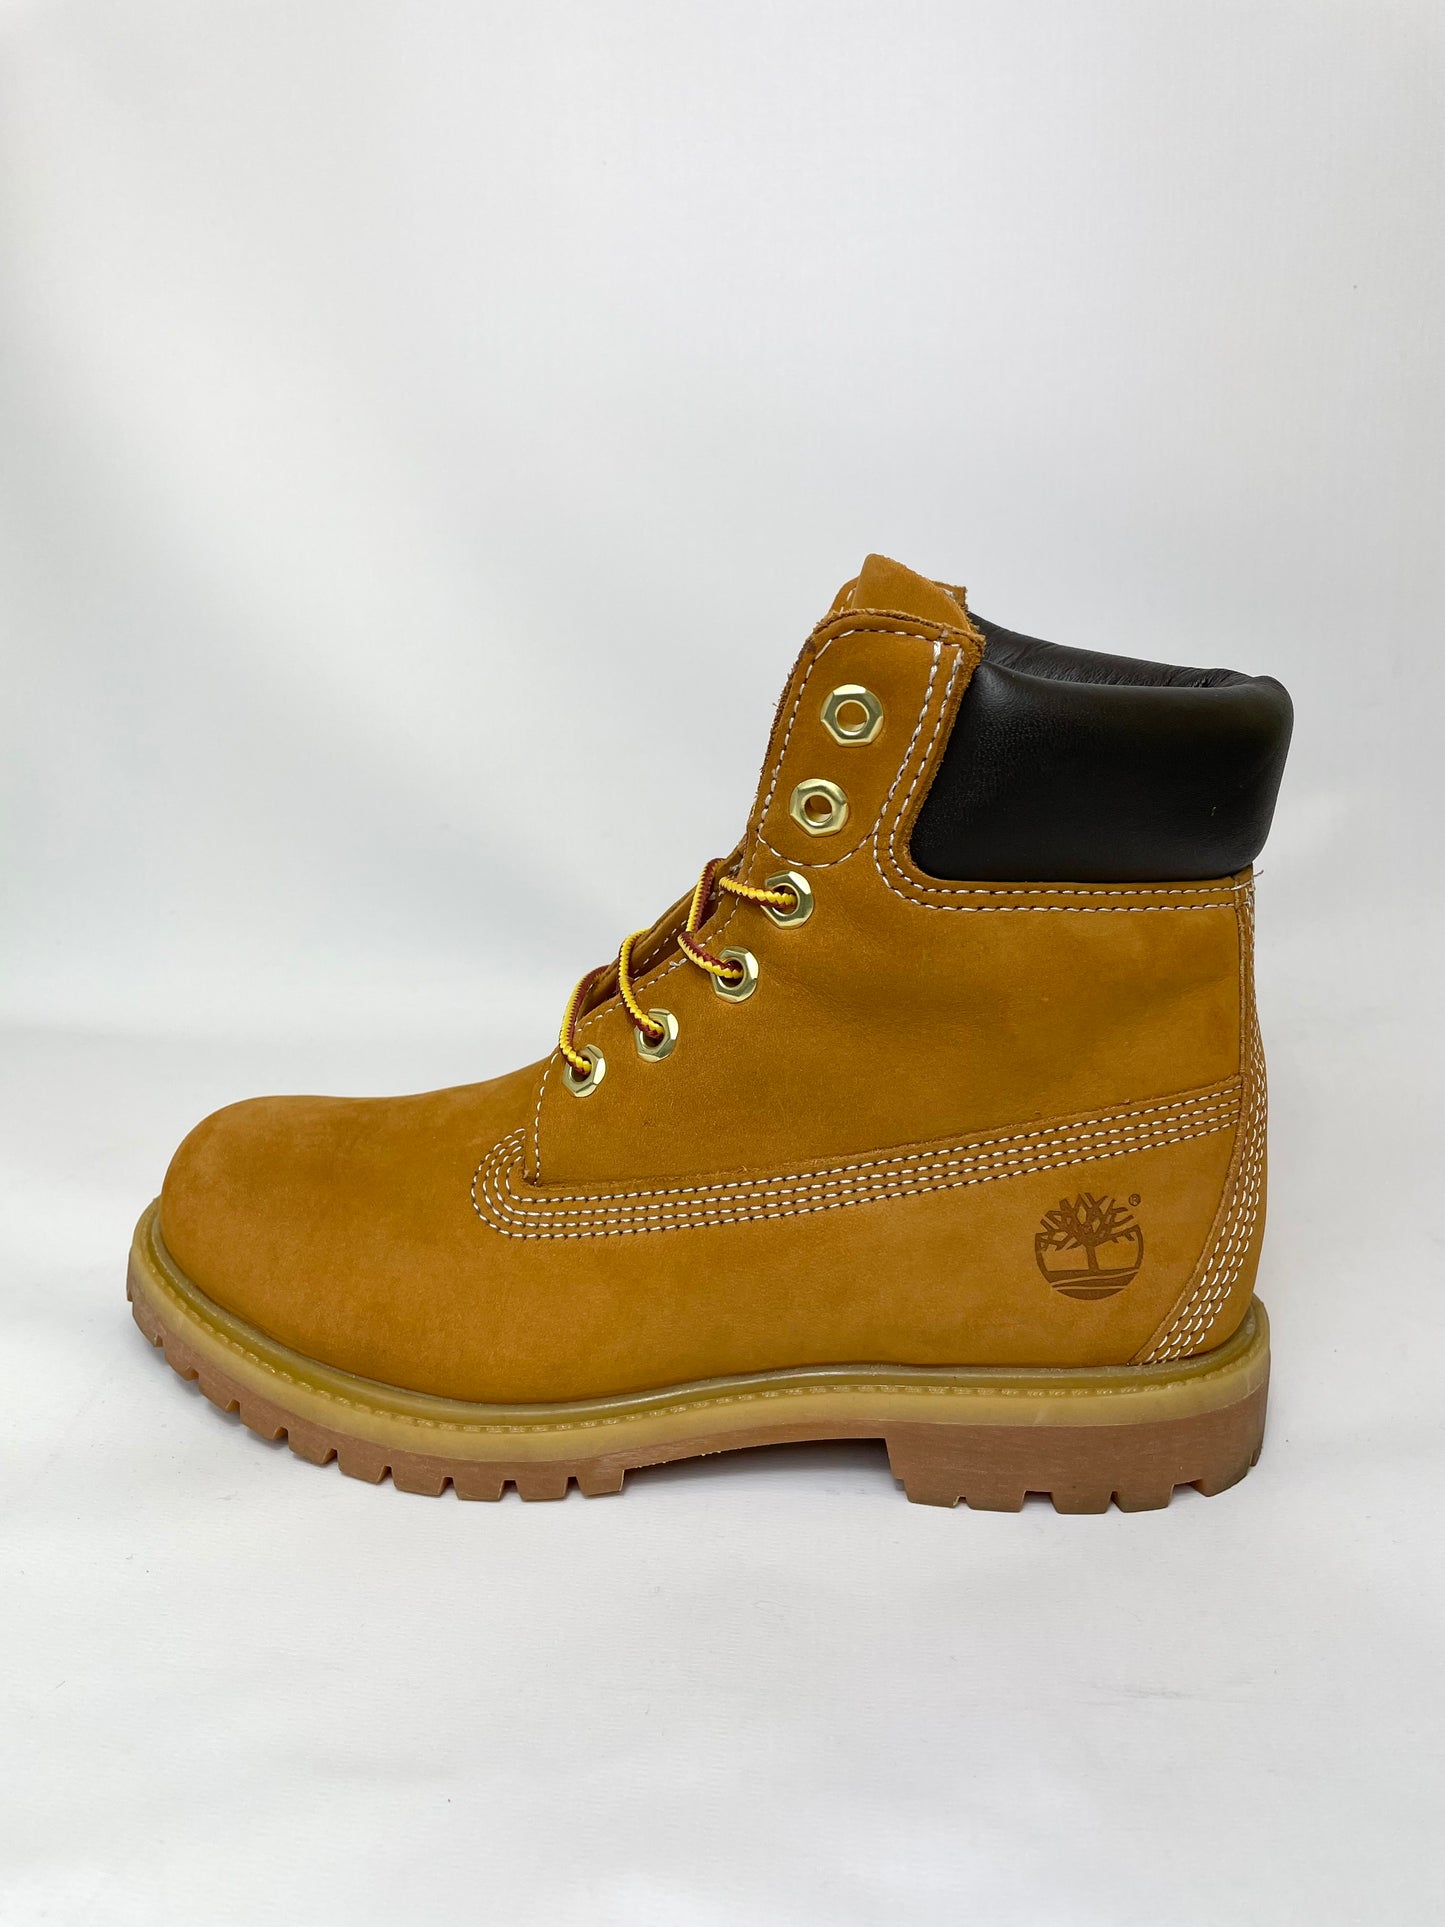 Timberland Premium 6 inch Womens Leather Boots Yellow